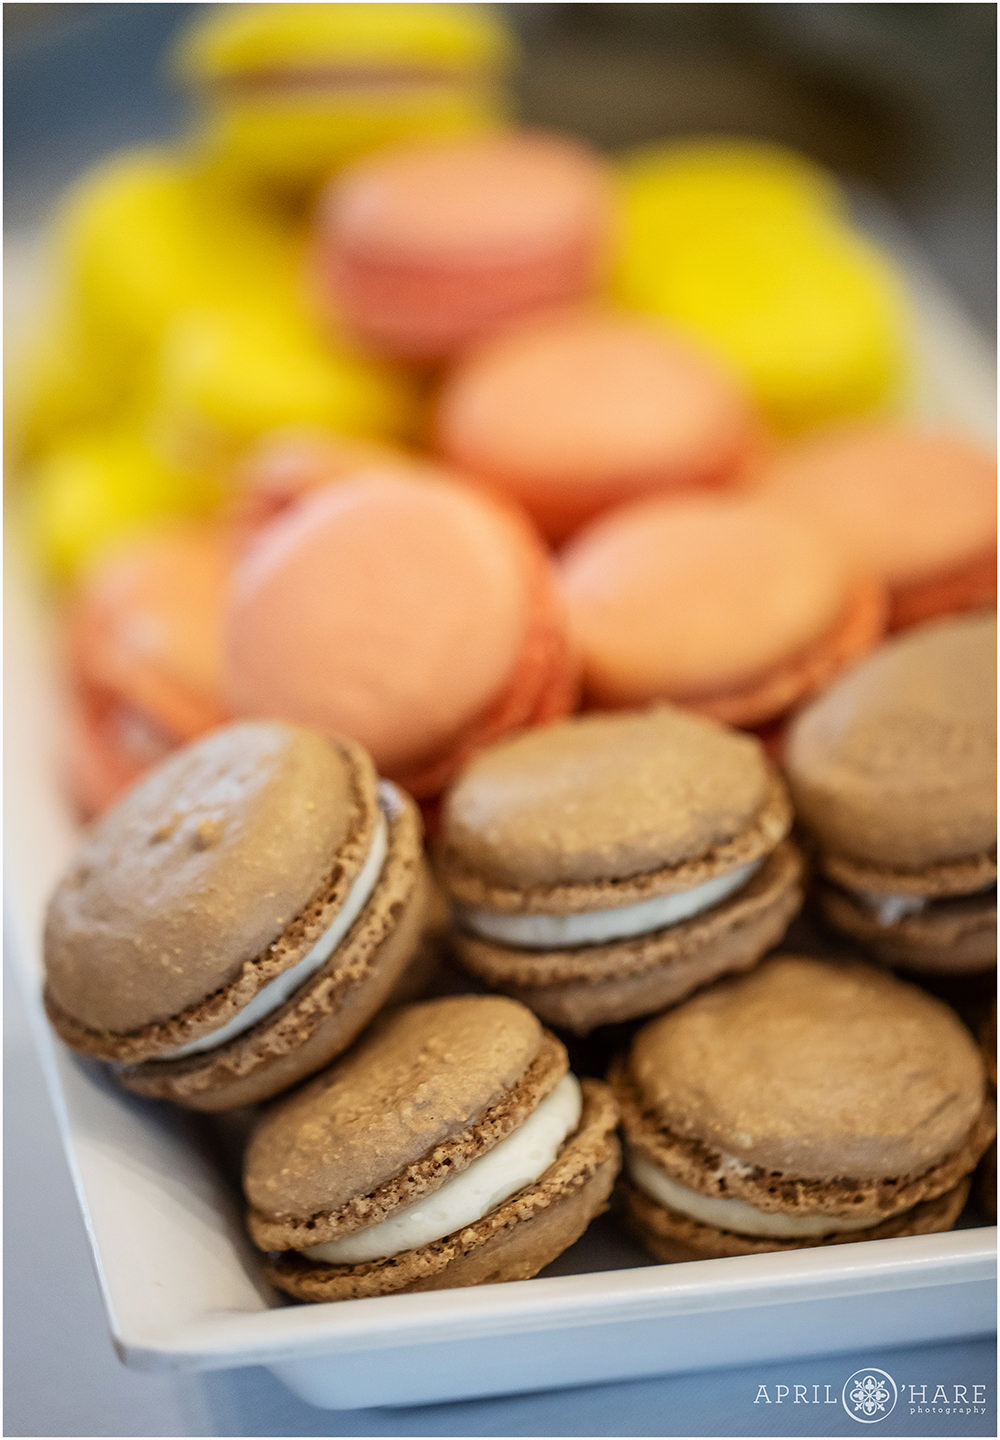 Detail photo from the dessert table with various flavored macarons